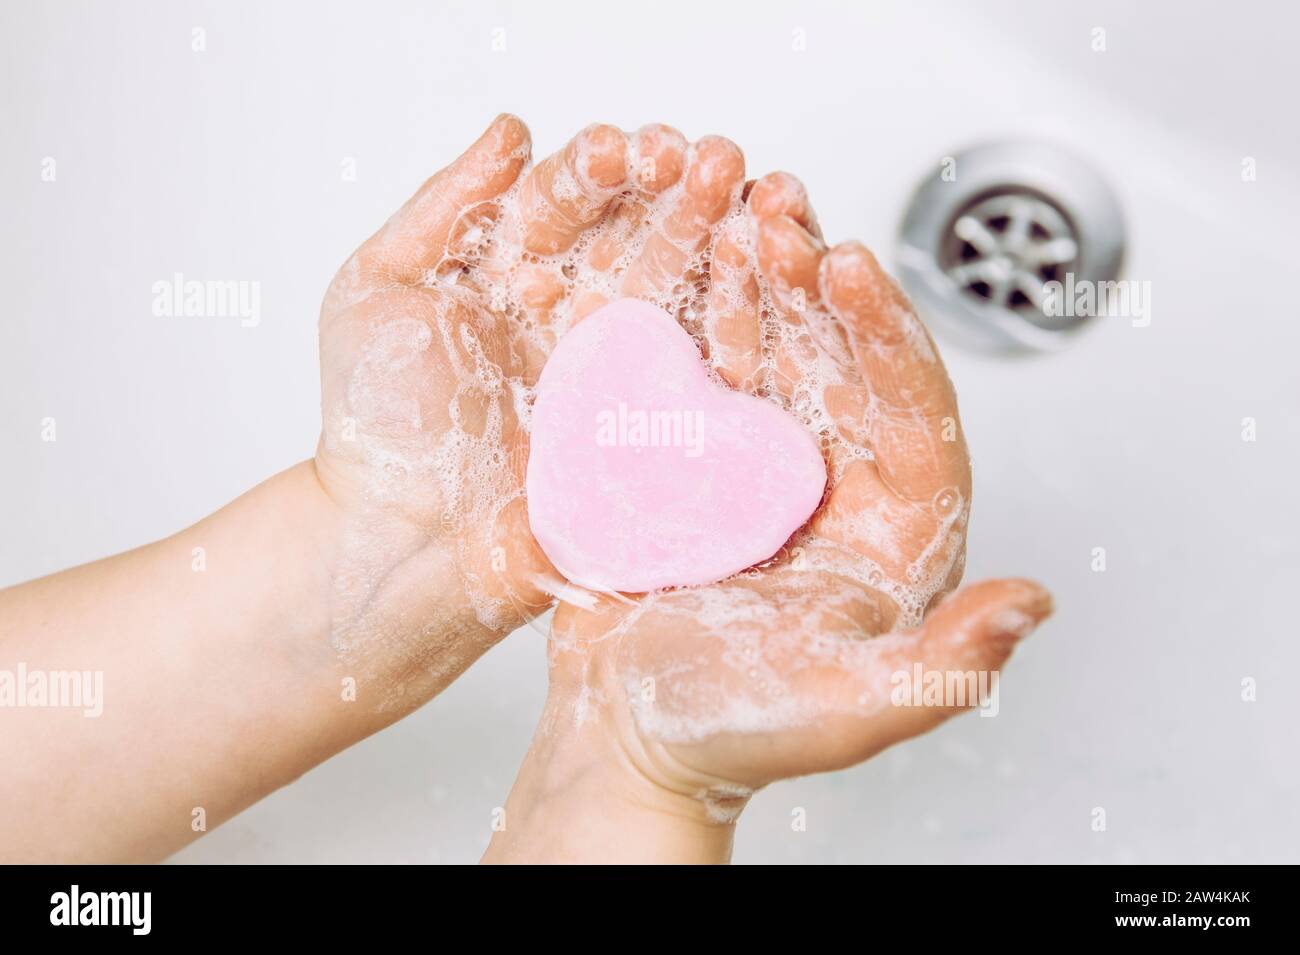 Importance of personal hygiene care. Flat lay view of child washing dirty hands with pink heart shape soap bar, lot of foam. Copy space. Stock Photo